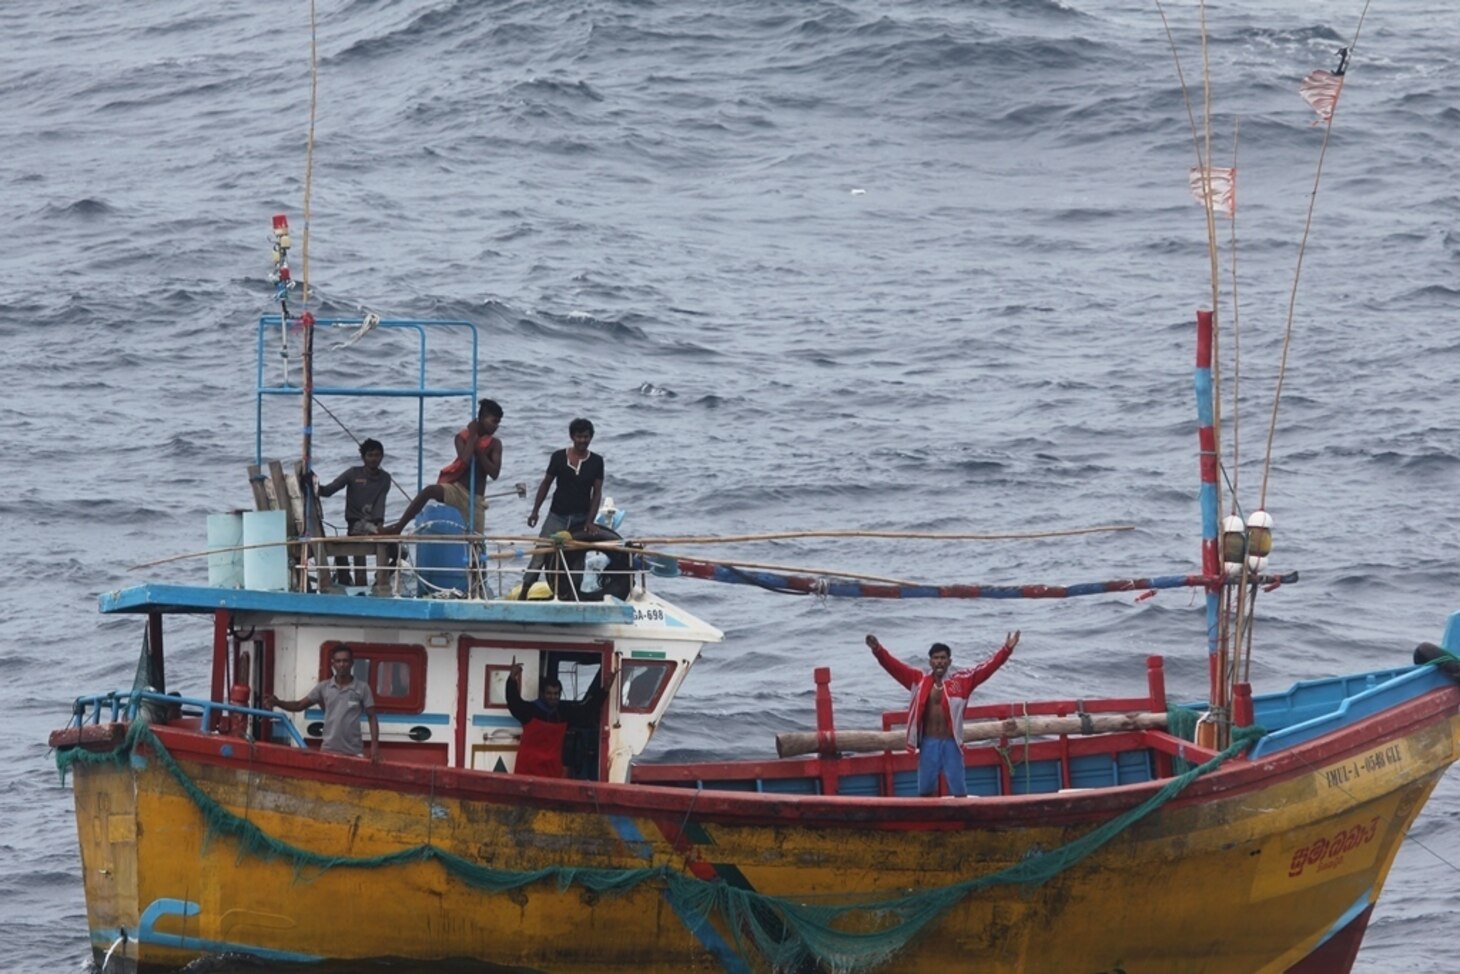 INDIAN OCEAN (Oct. 7, 2018) Stranded Sri Lankan fisherman signal the Arleigh Burke-class guided missile destroyer USS Decatur (DDG 73) for assistance. After providing food and water, Decatur contacted the Sri Lankan authorities who came and towed the stranded vessel back to port. Decatur is forward deployed to the U.S. 7th Fleet area of operations in support of security and stability in the Indo-Pacific region.